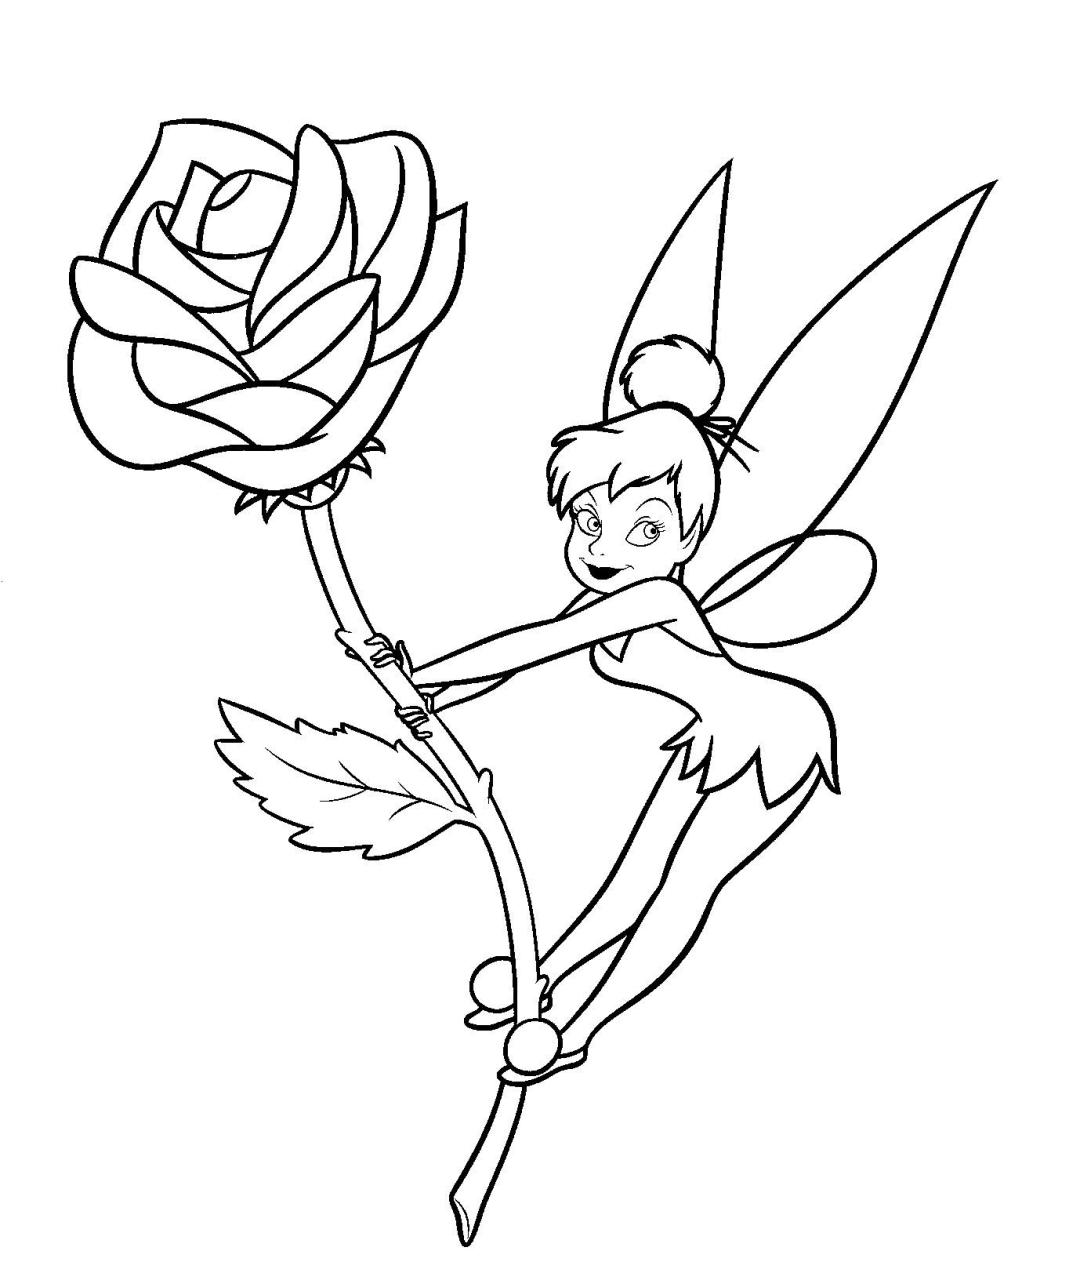 Tinkerbell Coloring Pages Fairy coloring pages, Tinkerbell coloring